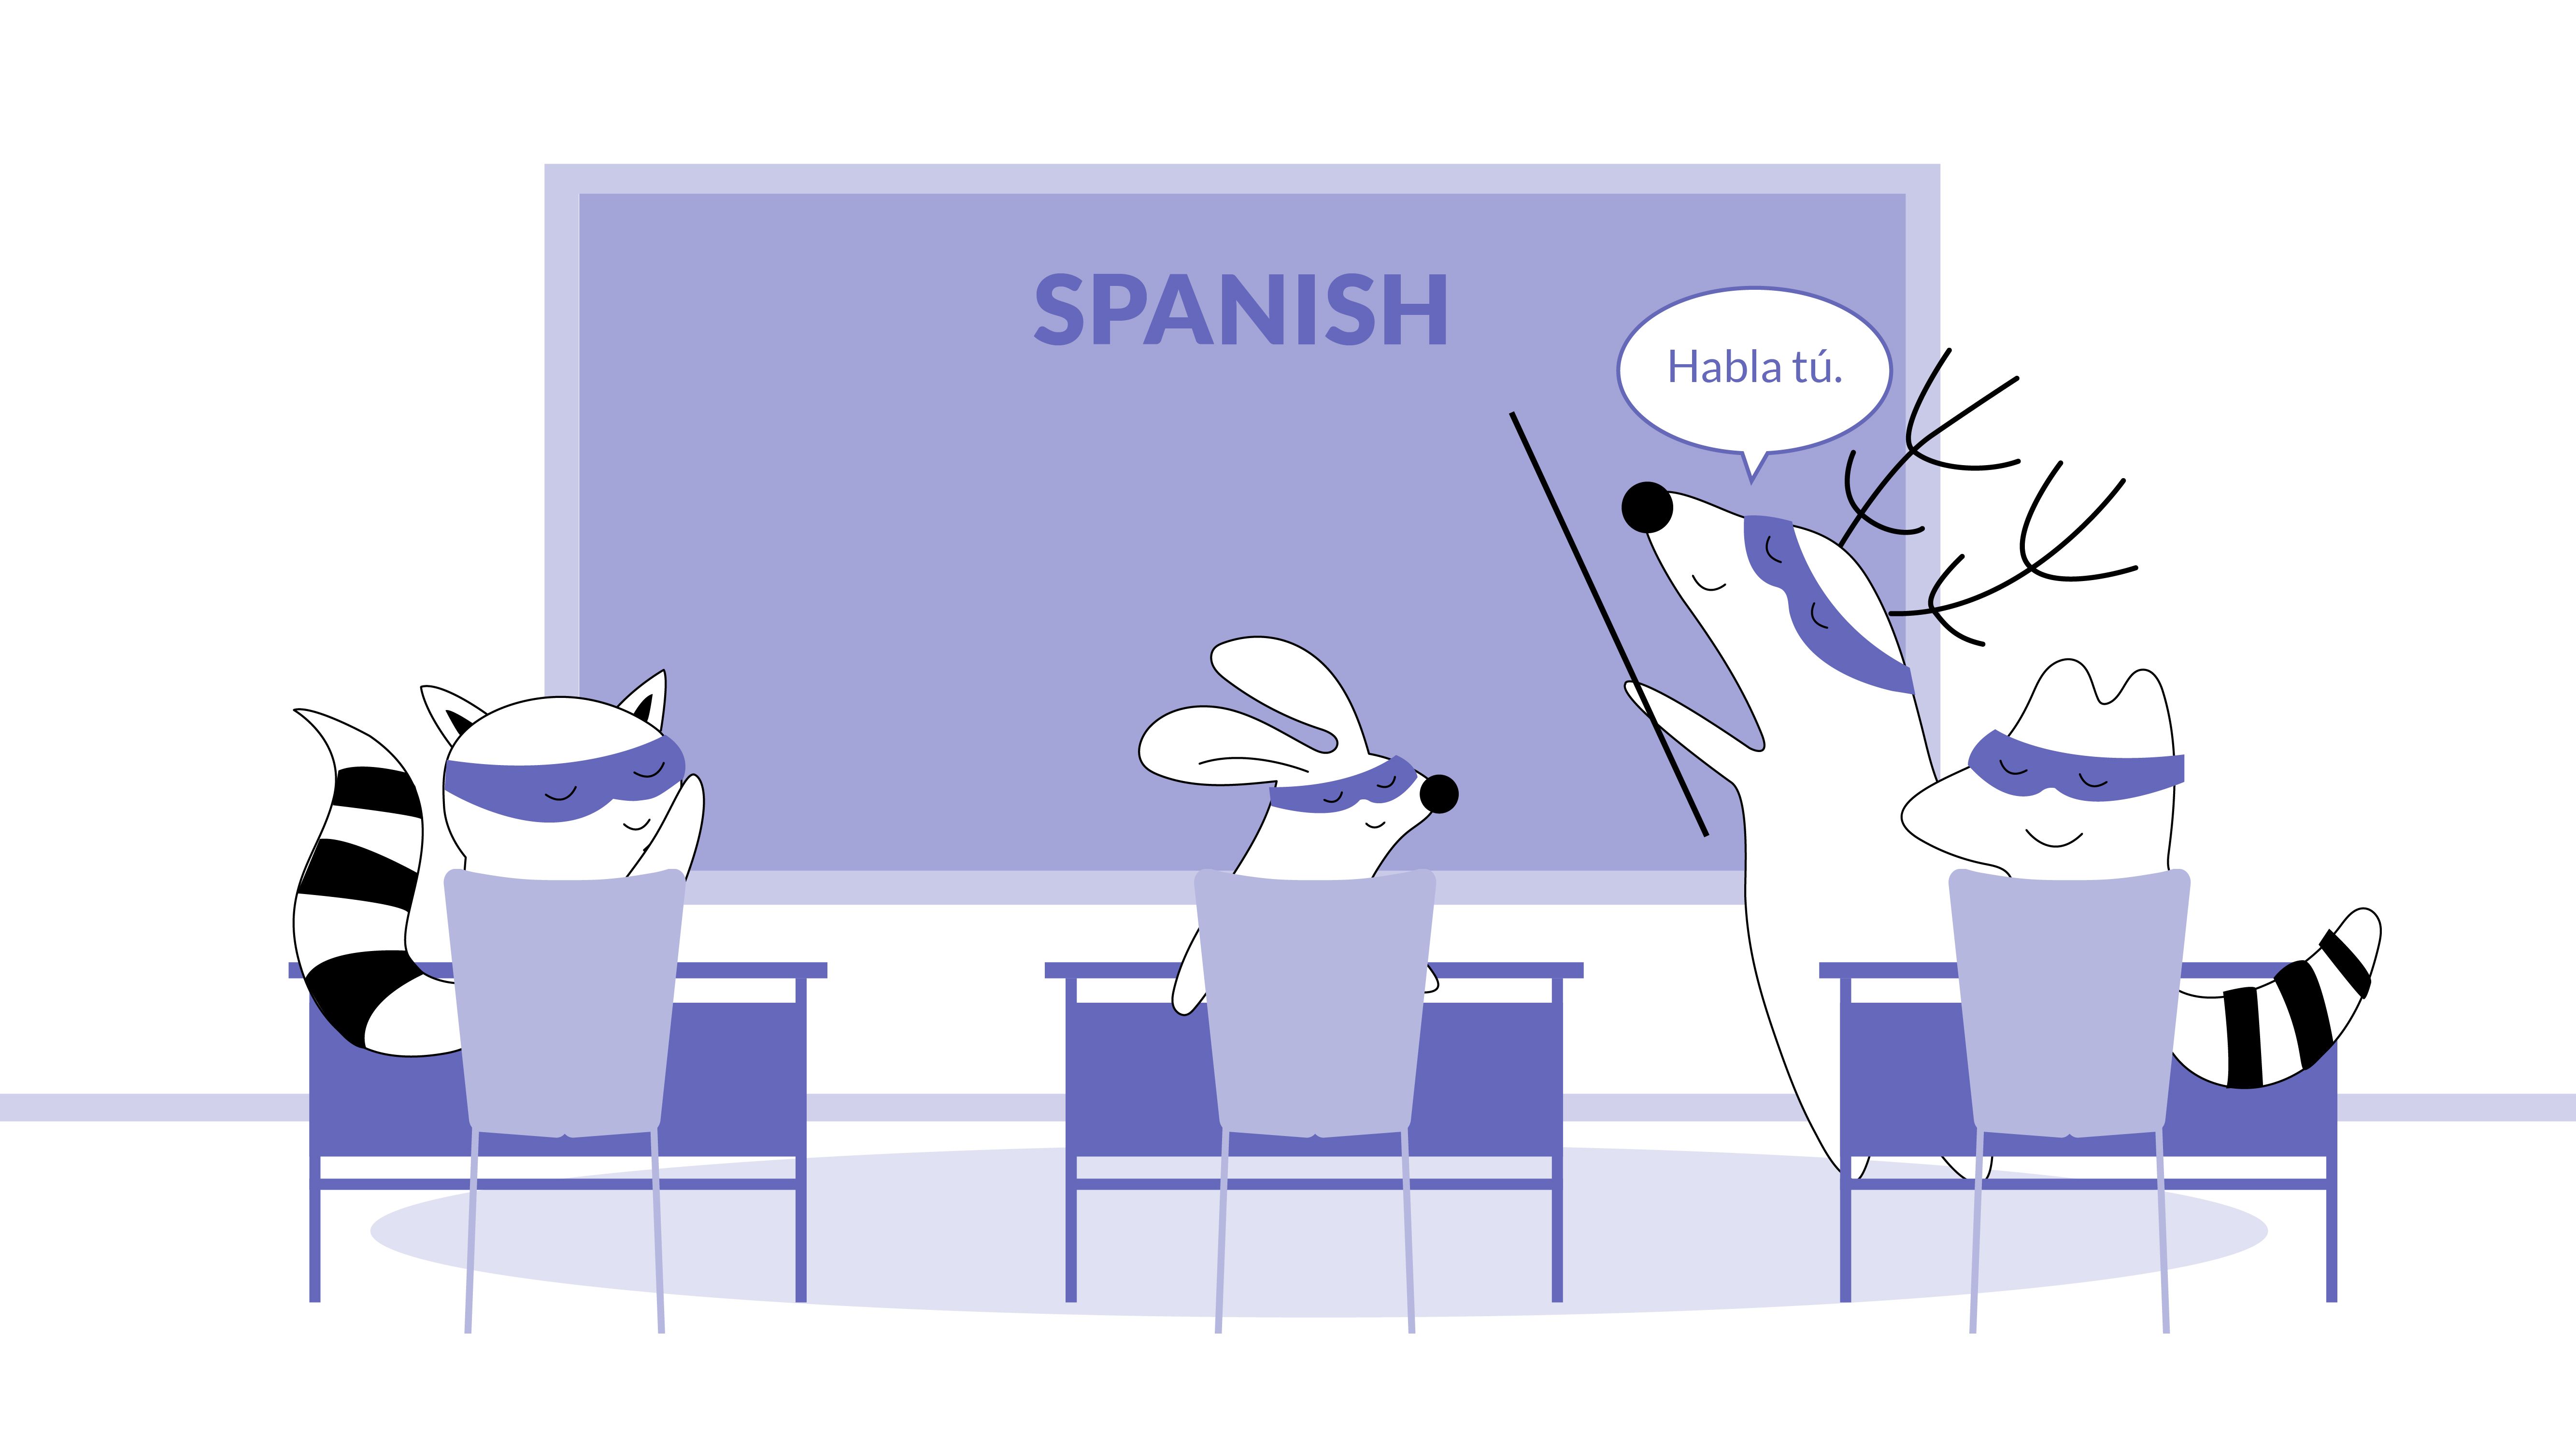 Benji and Pocky are in the Spanish classroom. Soren is the teacher and tells Pocky, who’s raising his hand, “Habla tú.”